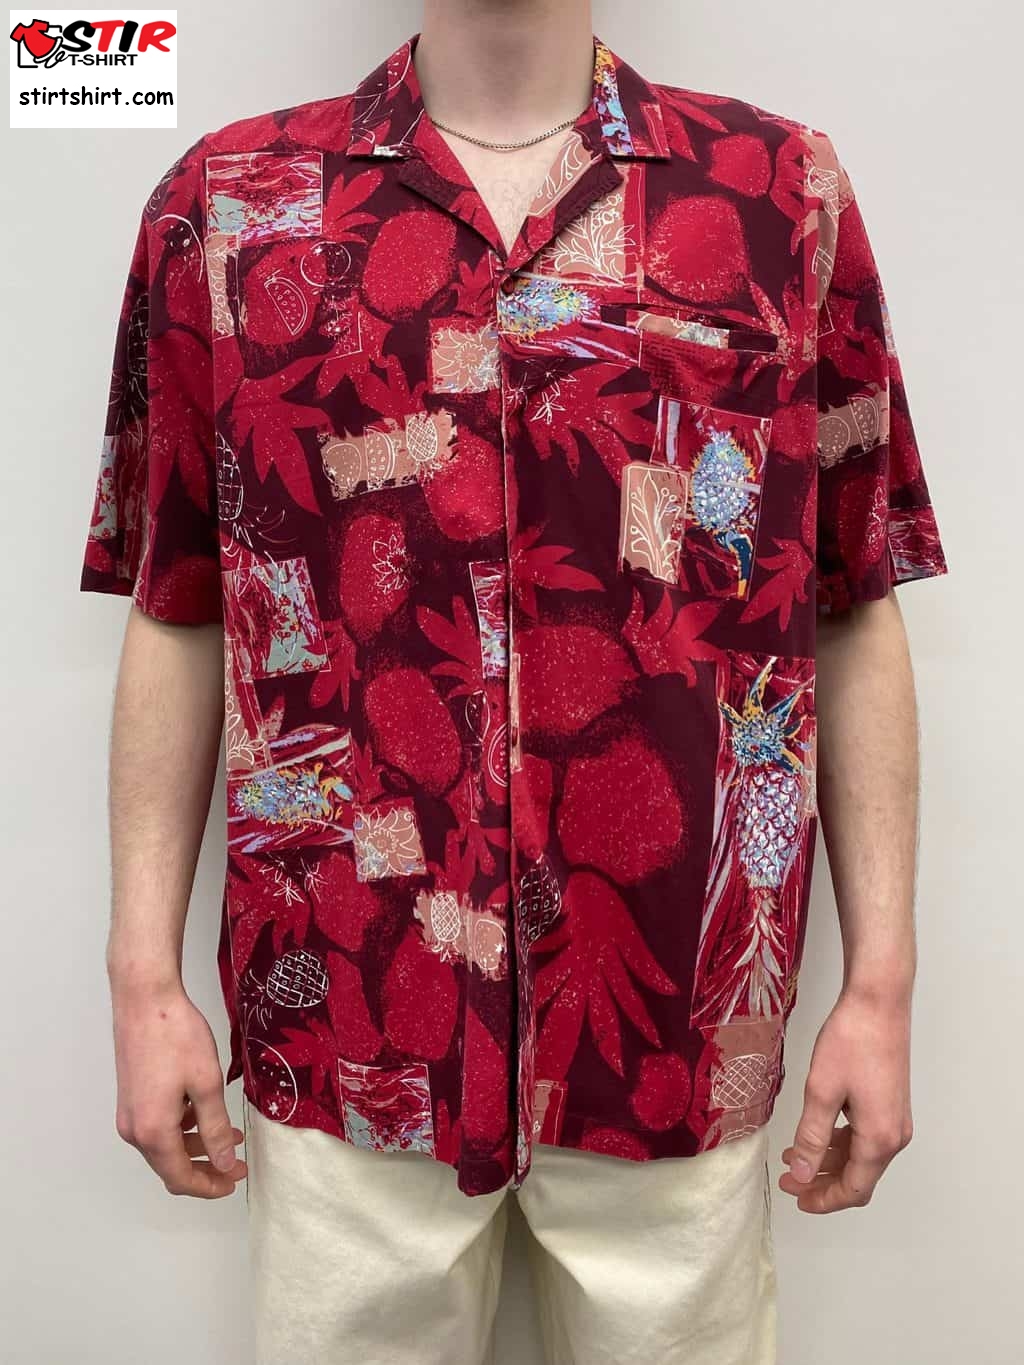 Mens Vintage Abstract Hawaiian Shirt In Red With Fruit And Floral Design Summer Tropical Pineapple Watermelon Pattern  Men's  Pattern